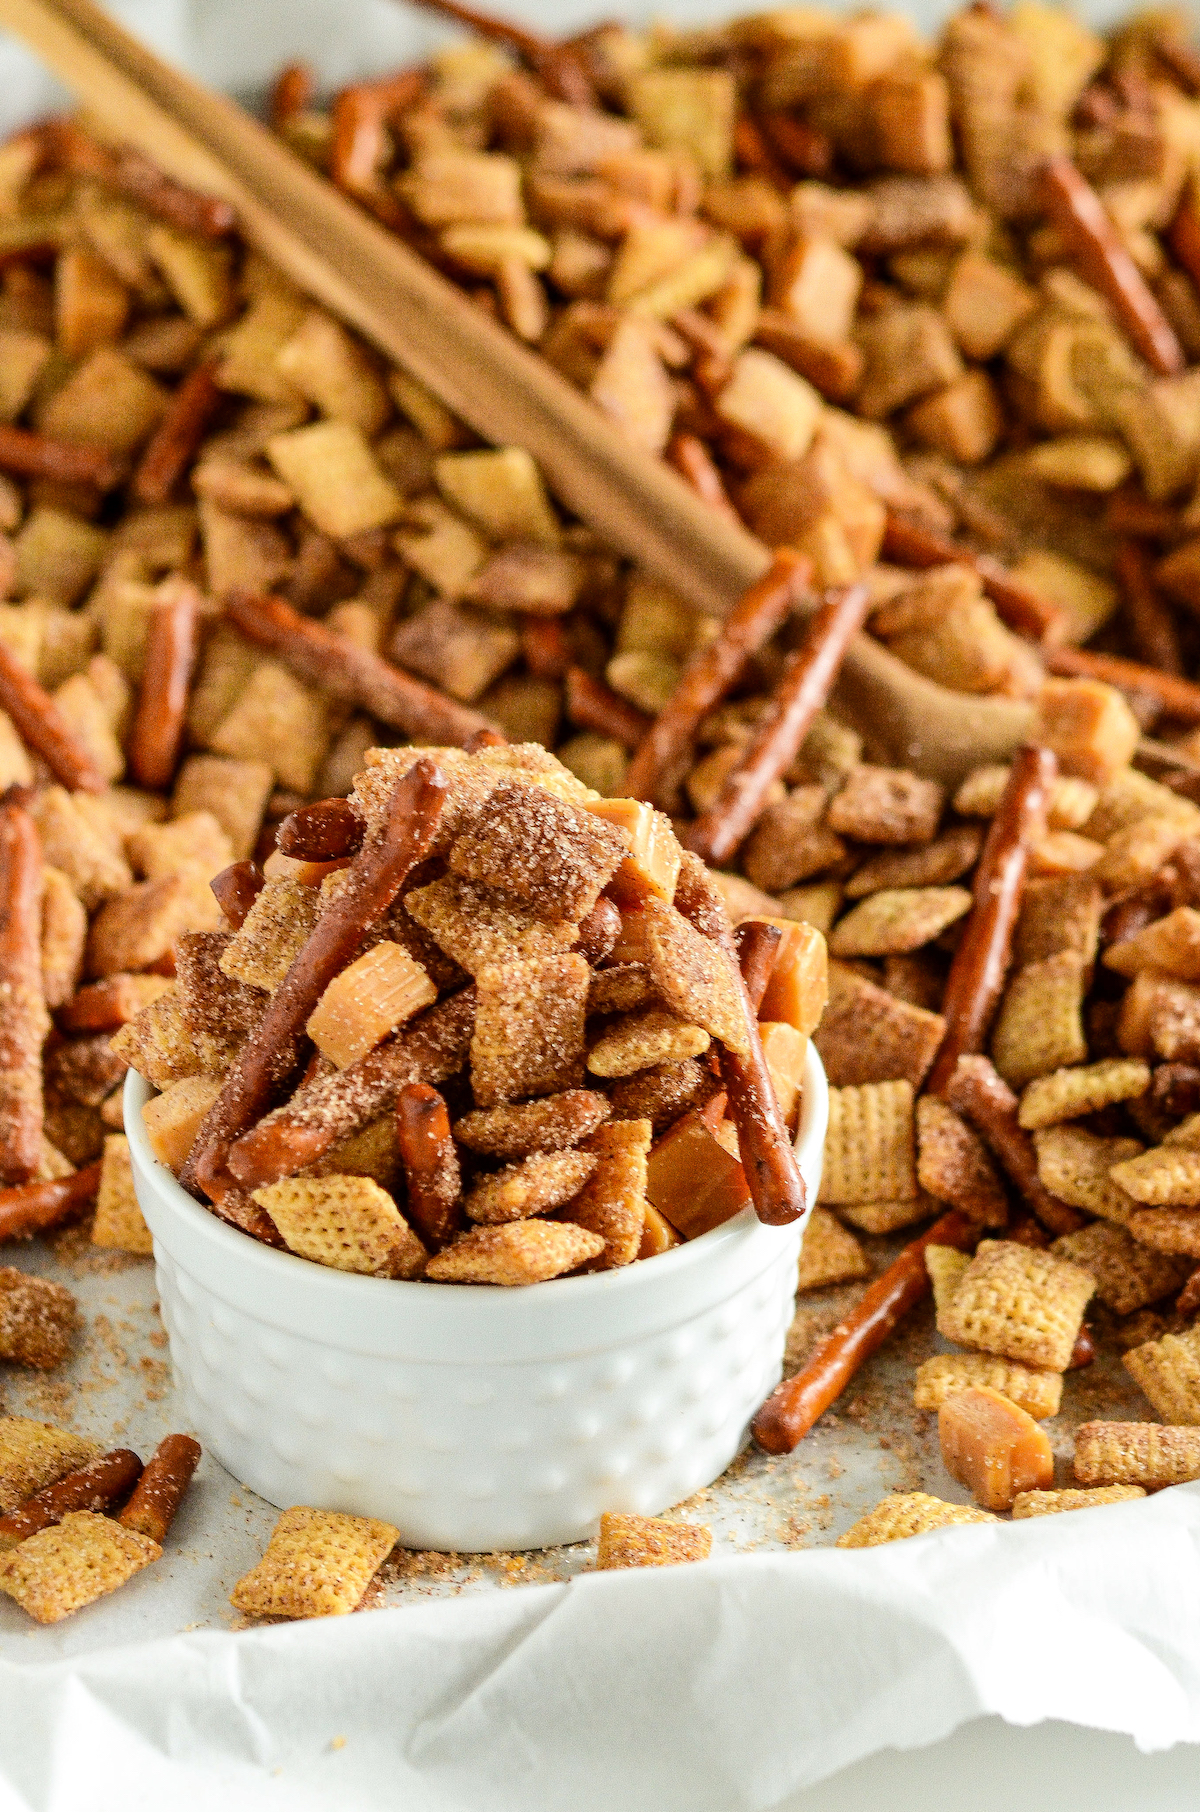 A bowl of cinnamon churro Chex mix set on a cookie sheet filled with the snack mix with a wooden spoon for serving.